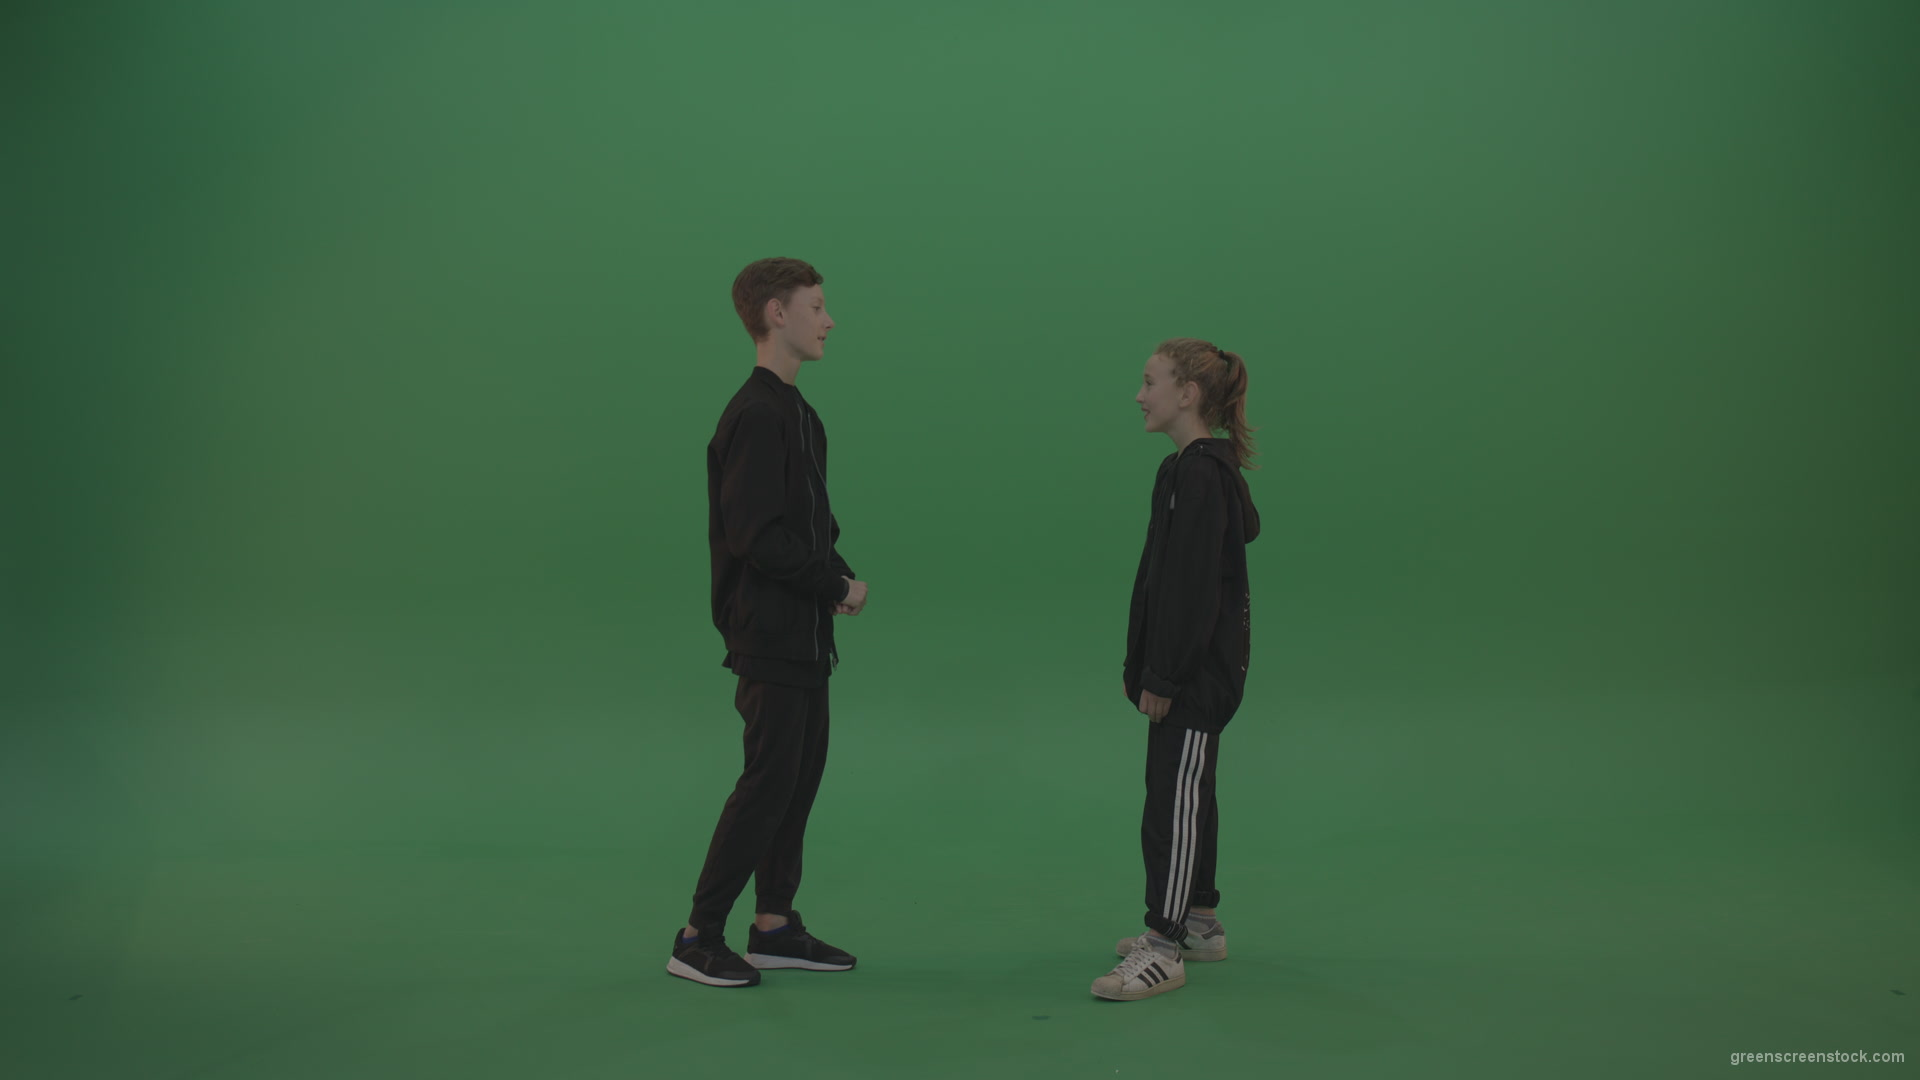 Boy-in-black-wear-talks-to-girl-over-chromakey-background_009 Green Screen Stock